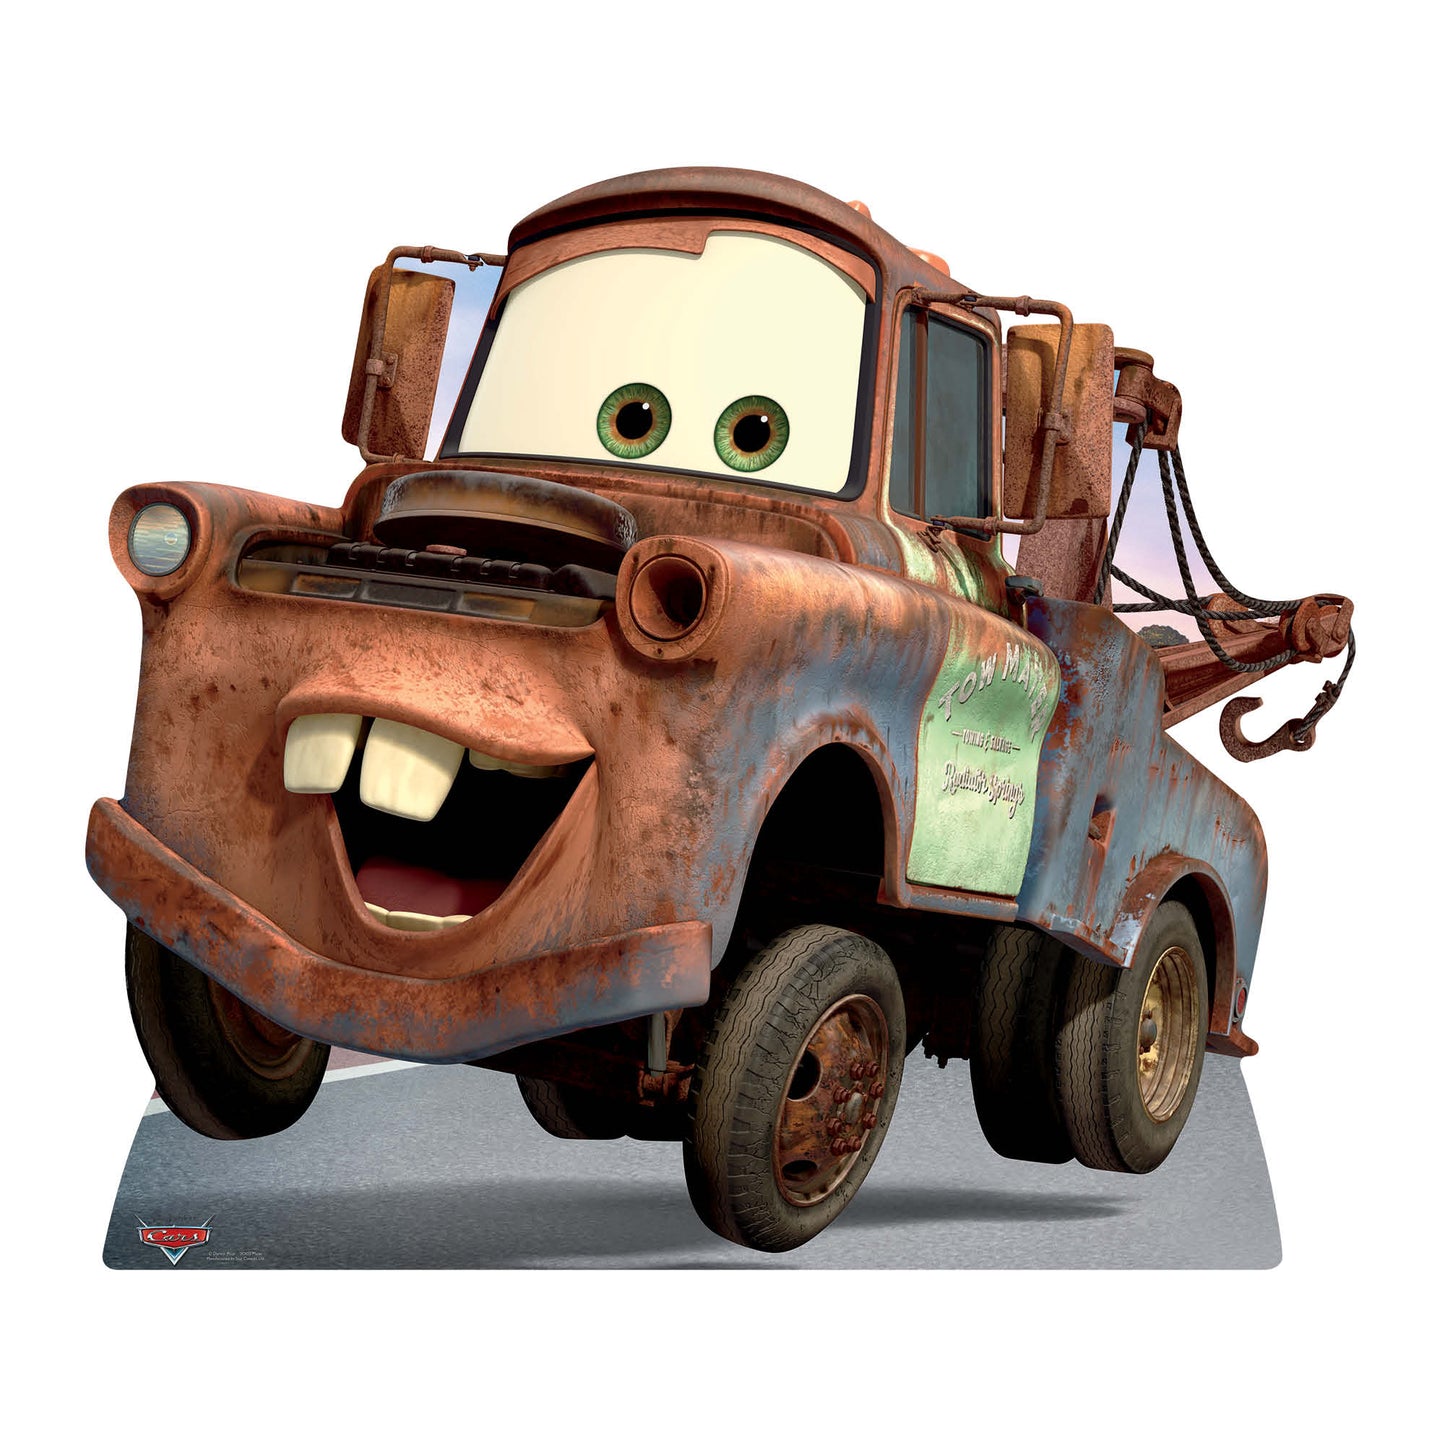 SC605 Mater Cardboard Cut Out Height 94cm